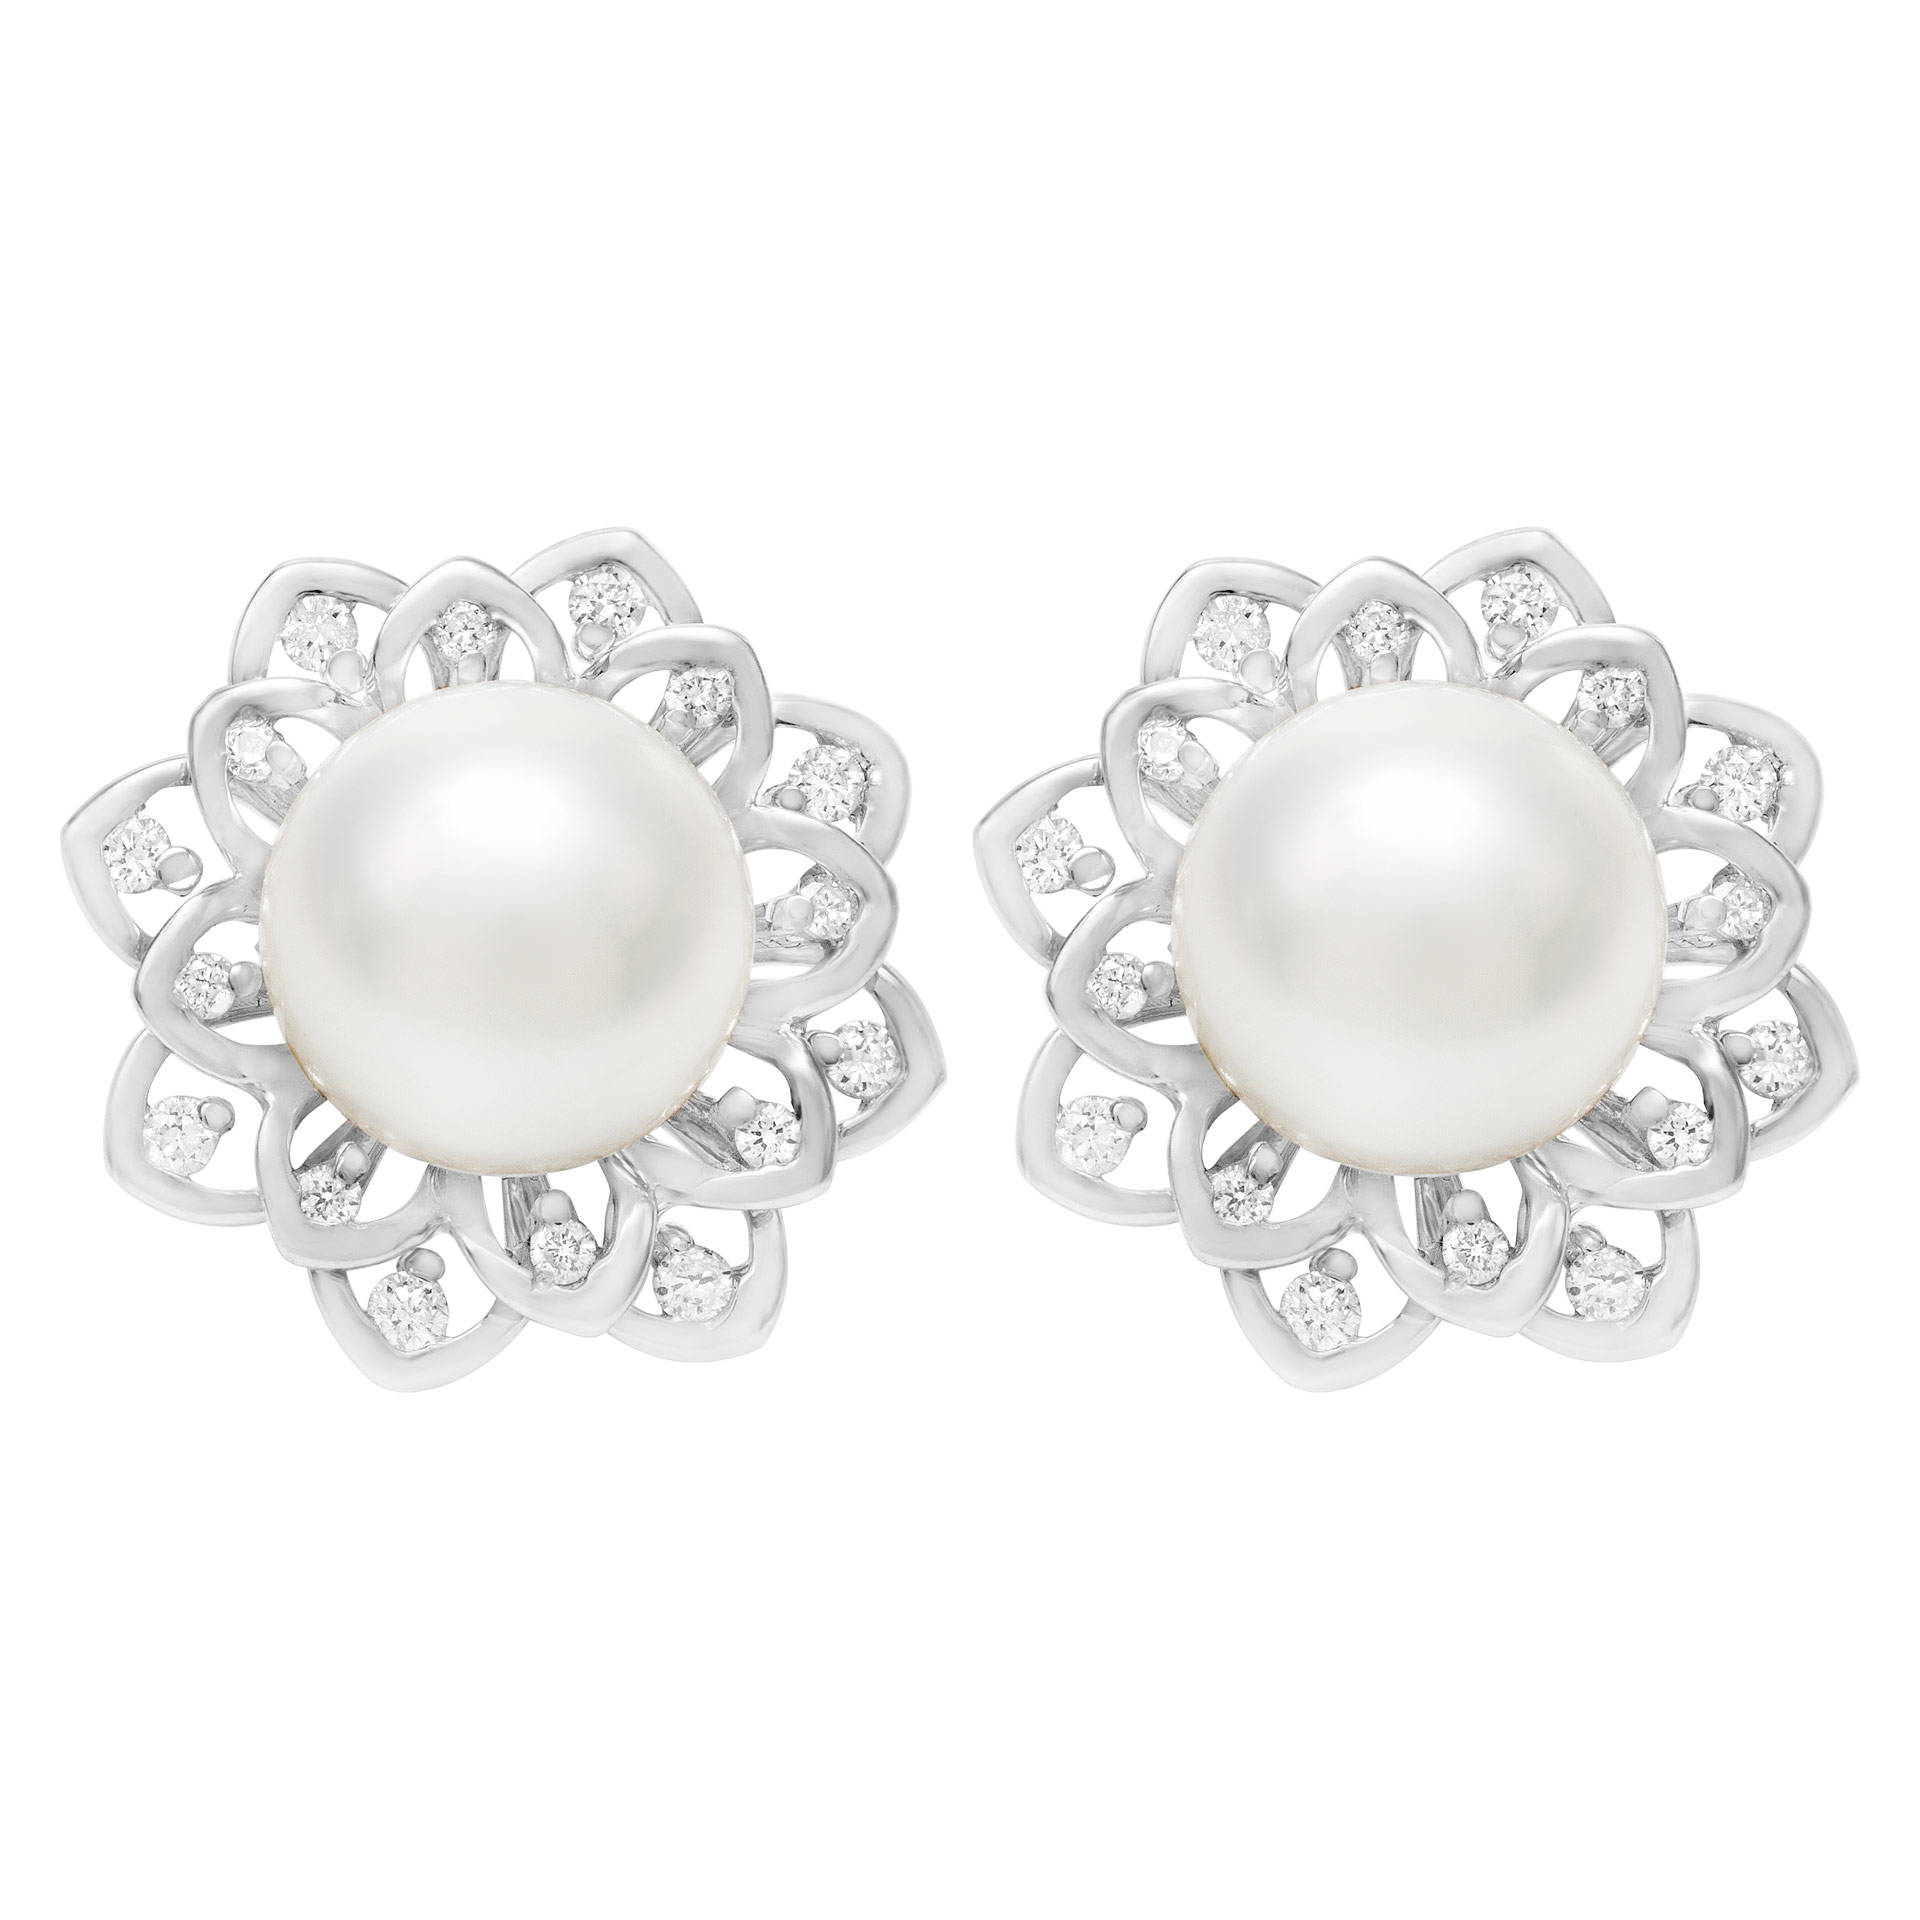 Cute and lovely 9mm South sea diamond pearl stud earrings in 18k white gold image 1